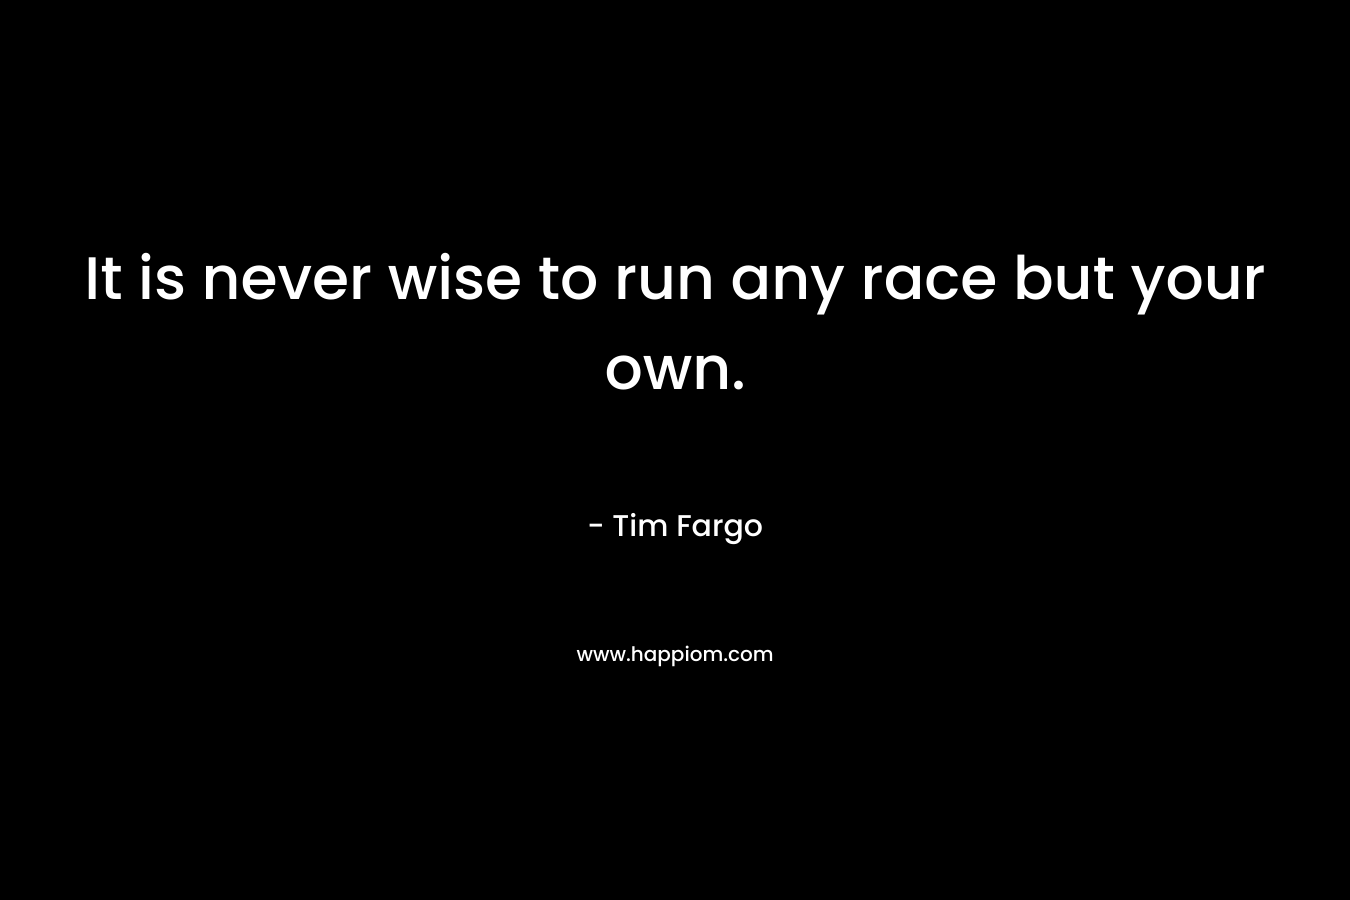 It is never wise to run any race but your own.